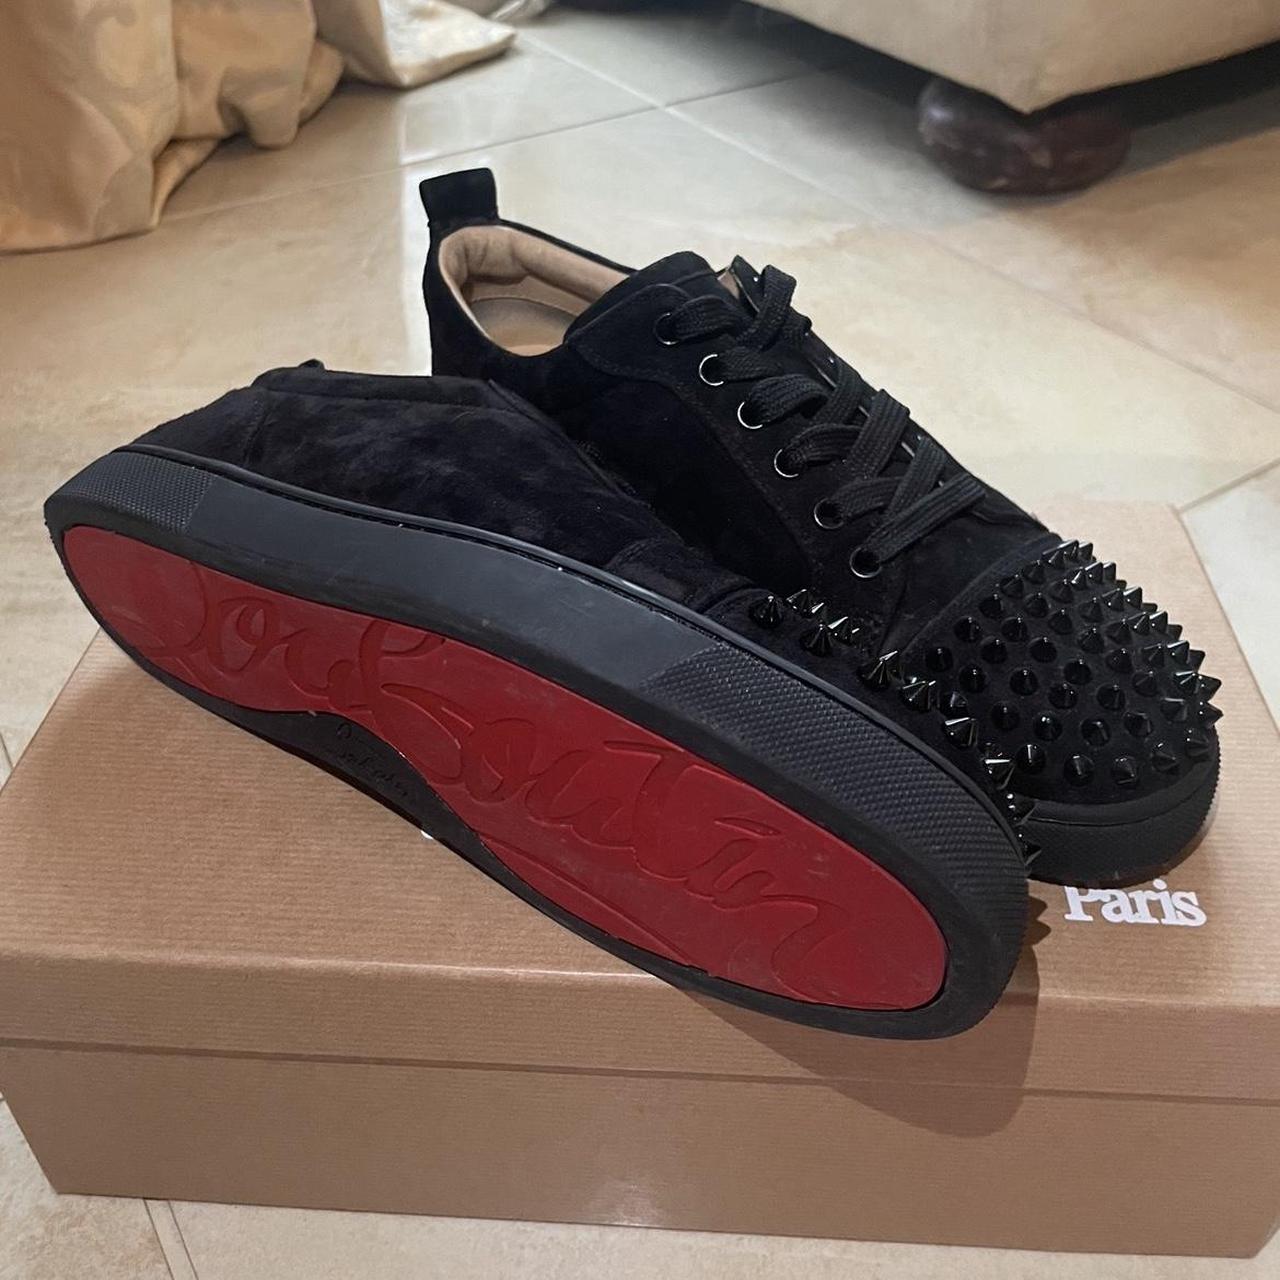 Authentic Christian Louboutin trainers, Comes with... - Depop